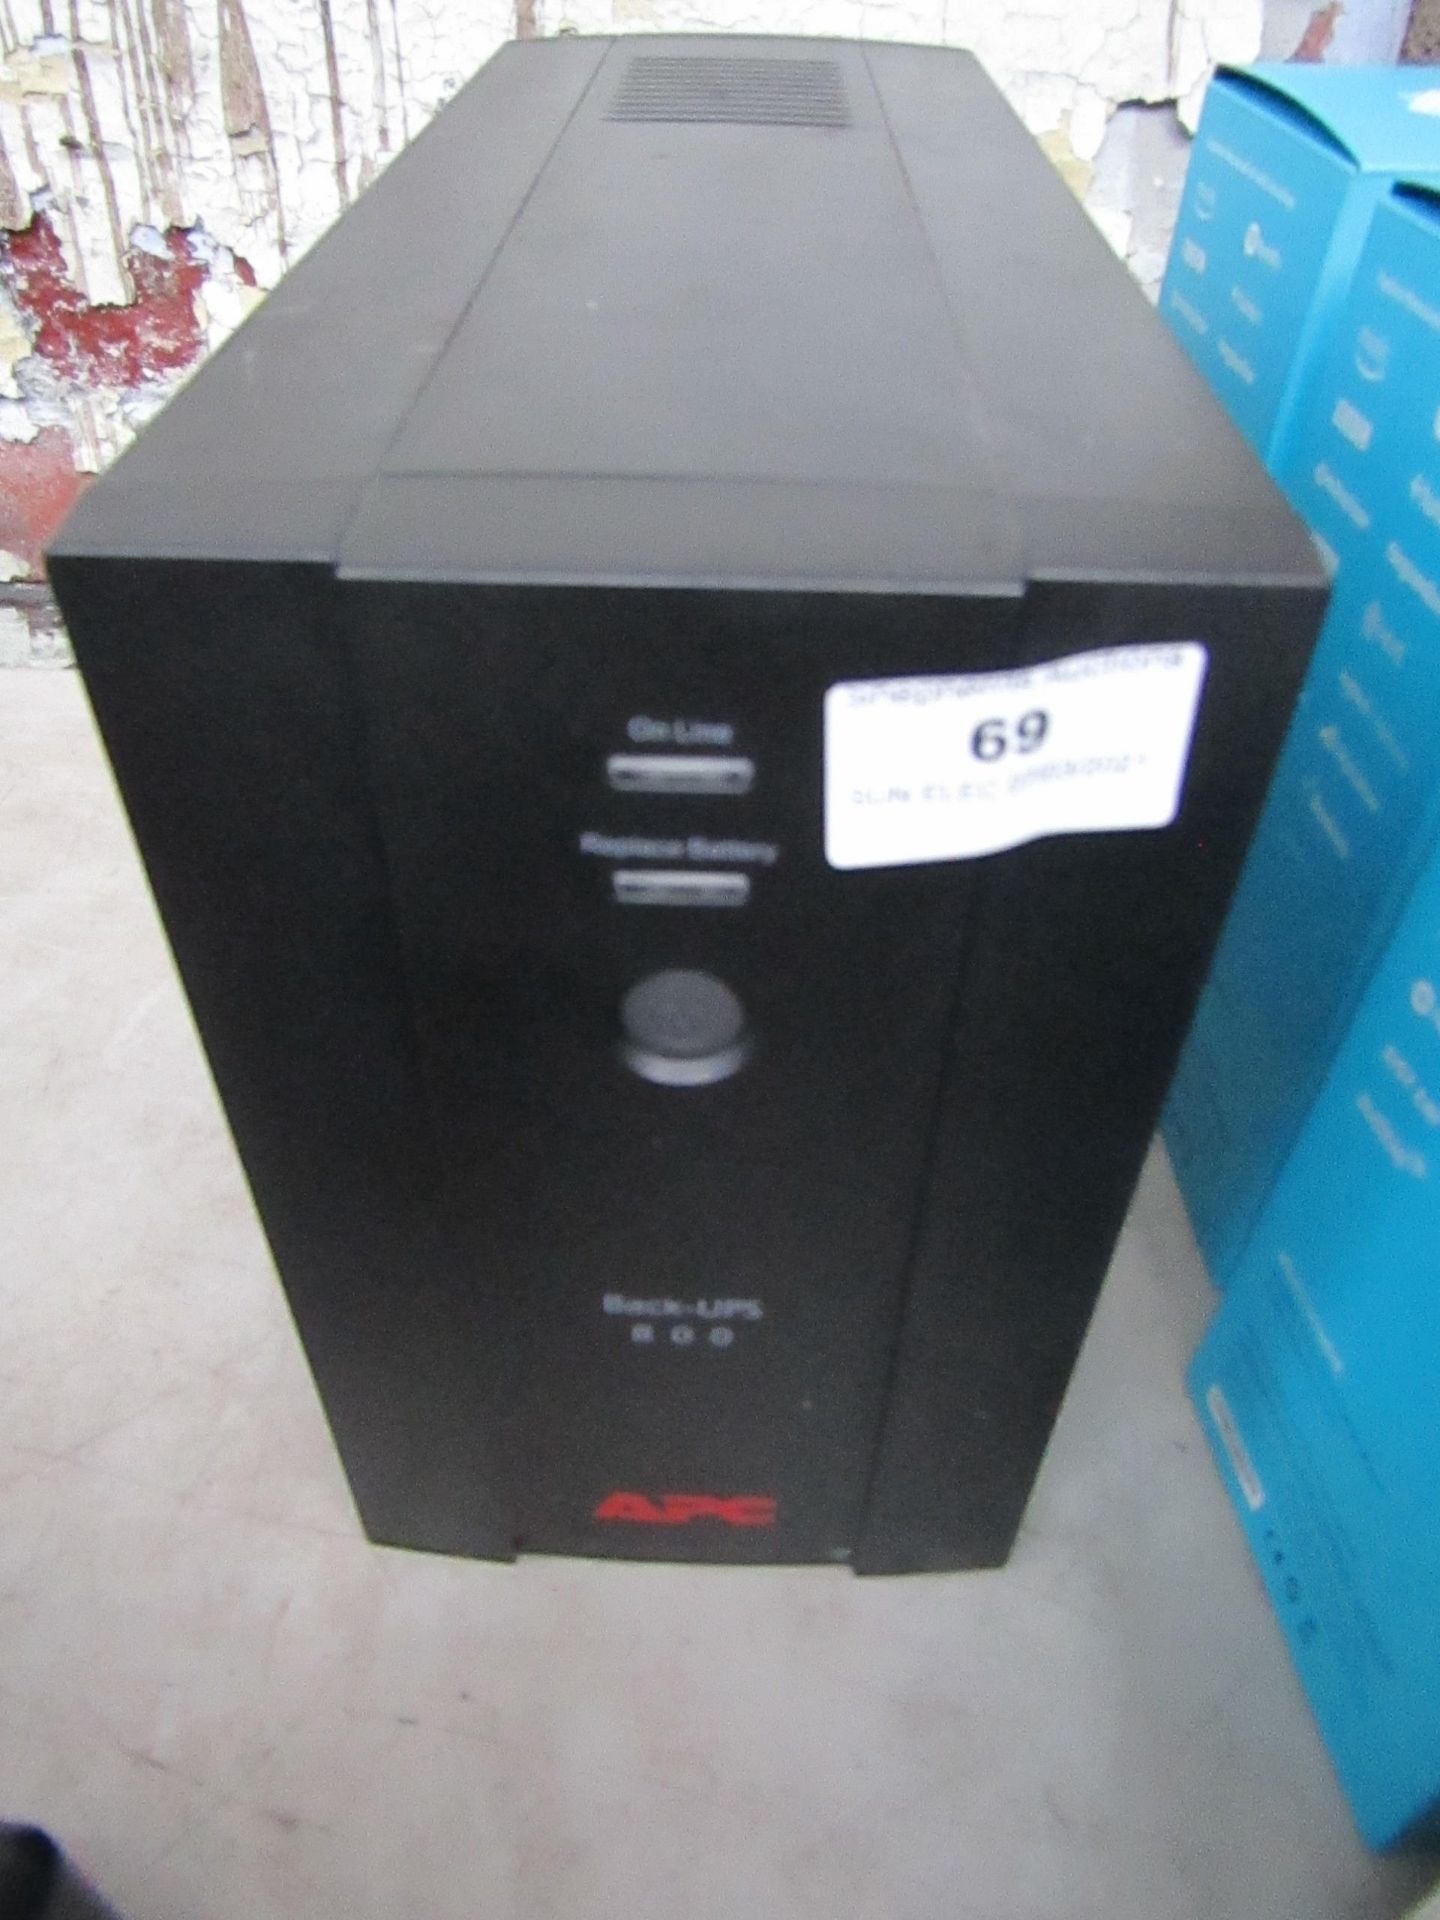 APC Back-UPS 800, unchecked.